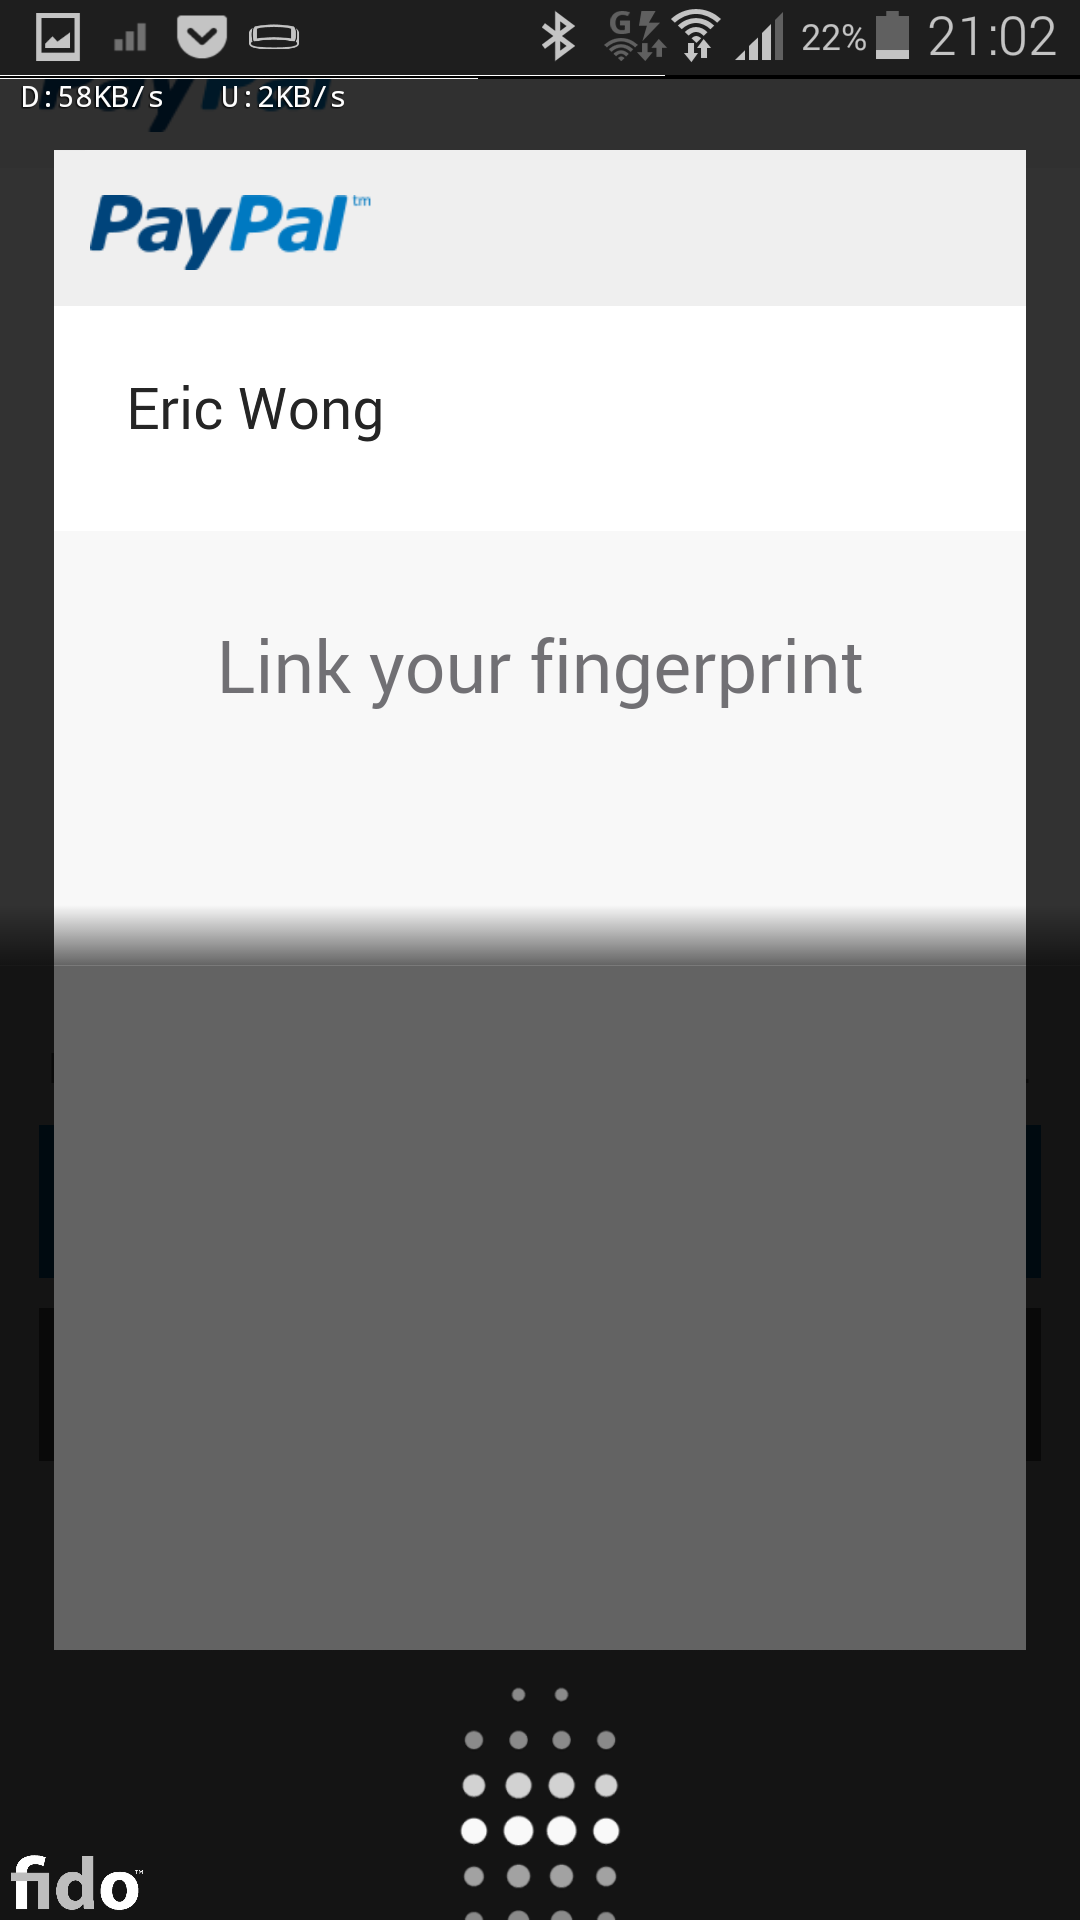 ycptech reviews samsung galaxy s5 fingerprint linking paypal continued